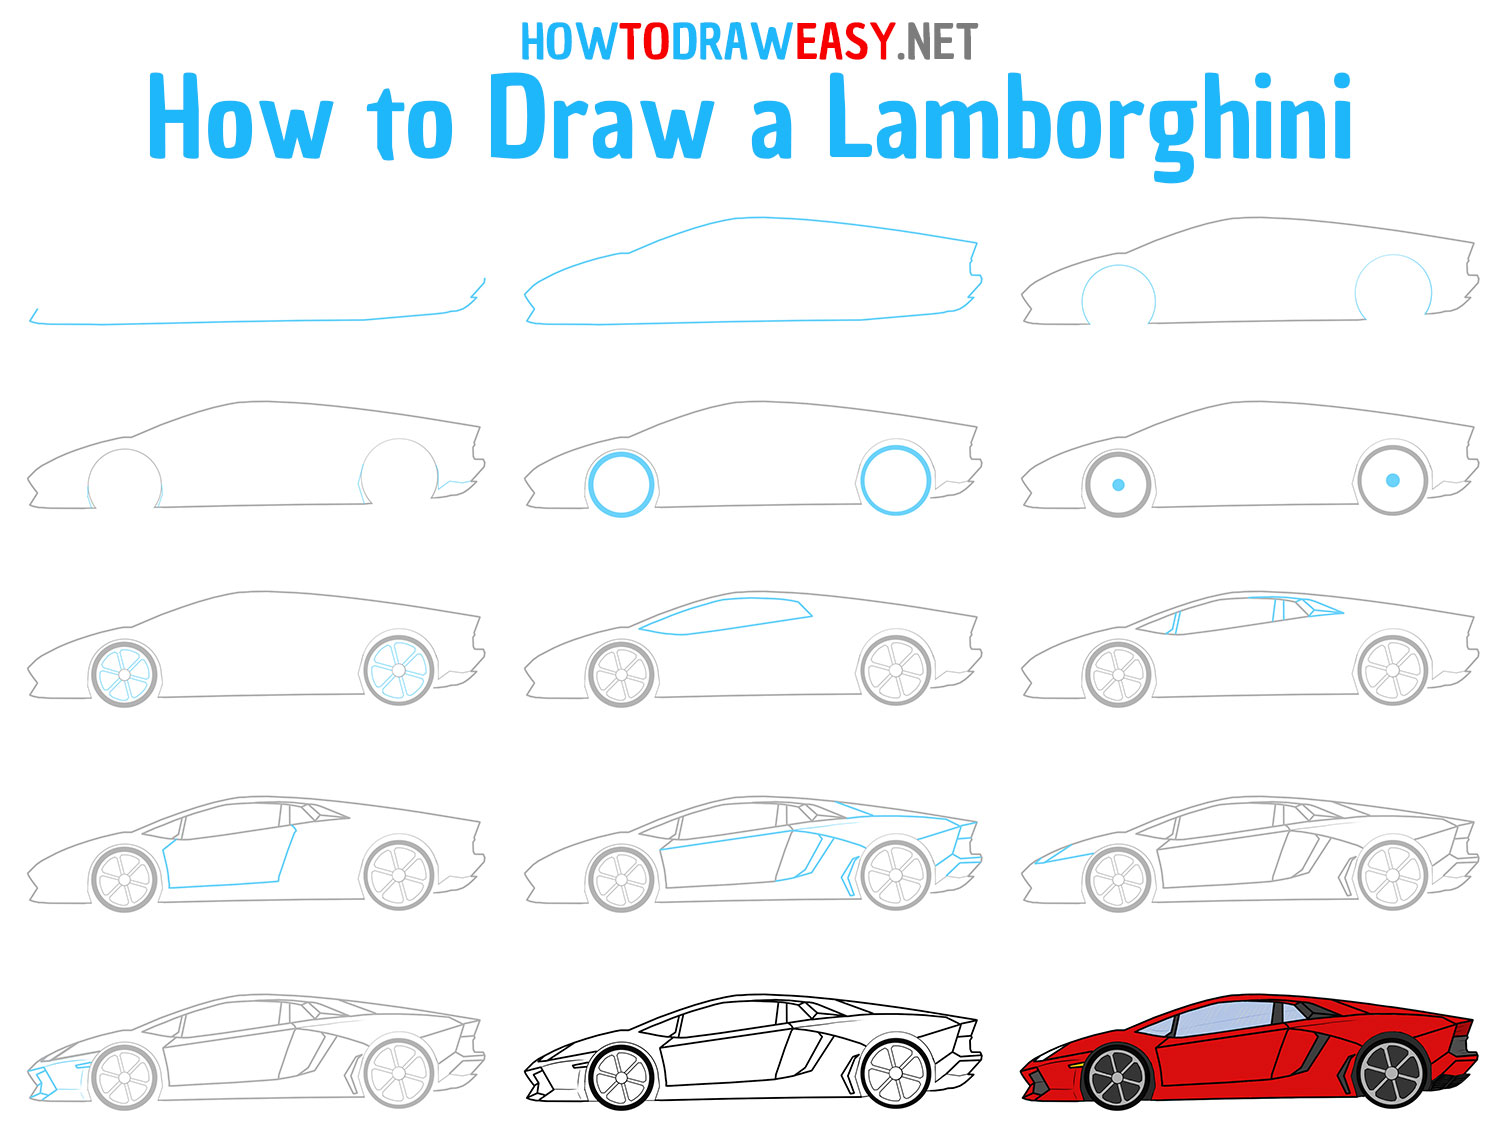 How to Draw a Lamborghini Step by Step